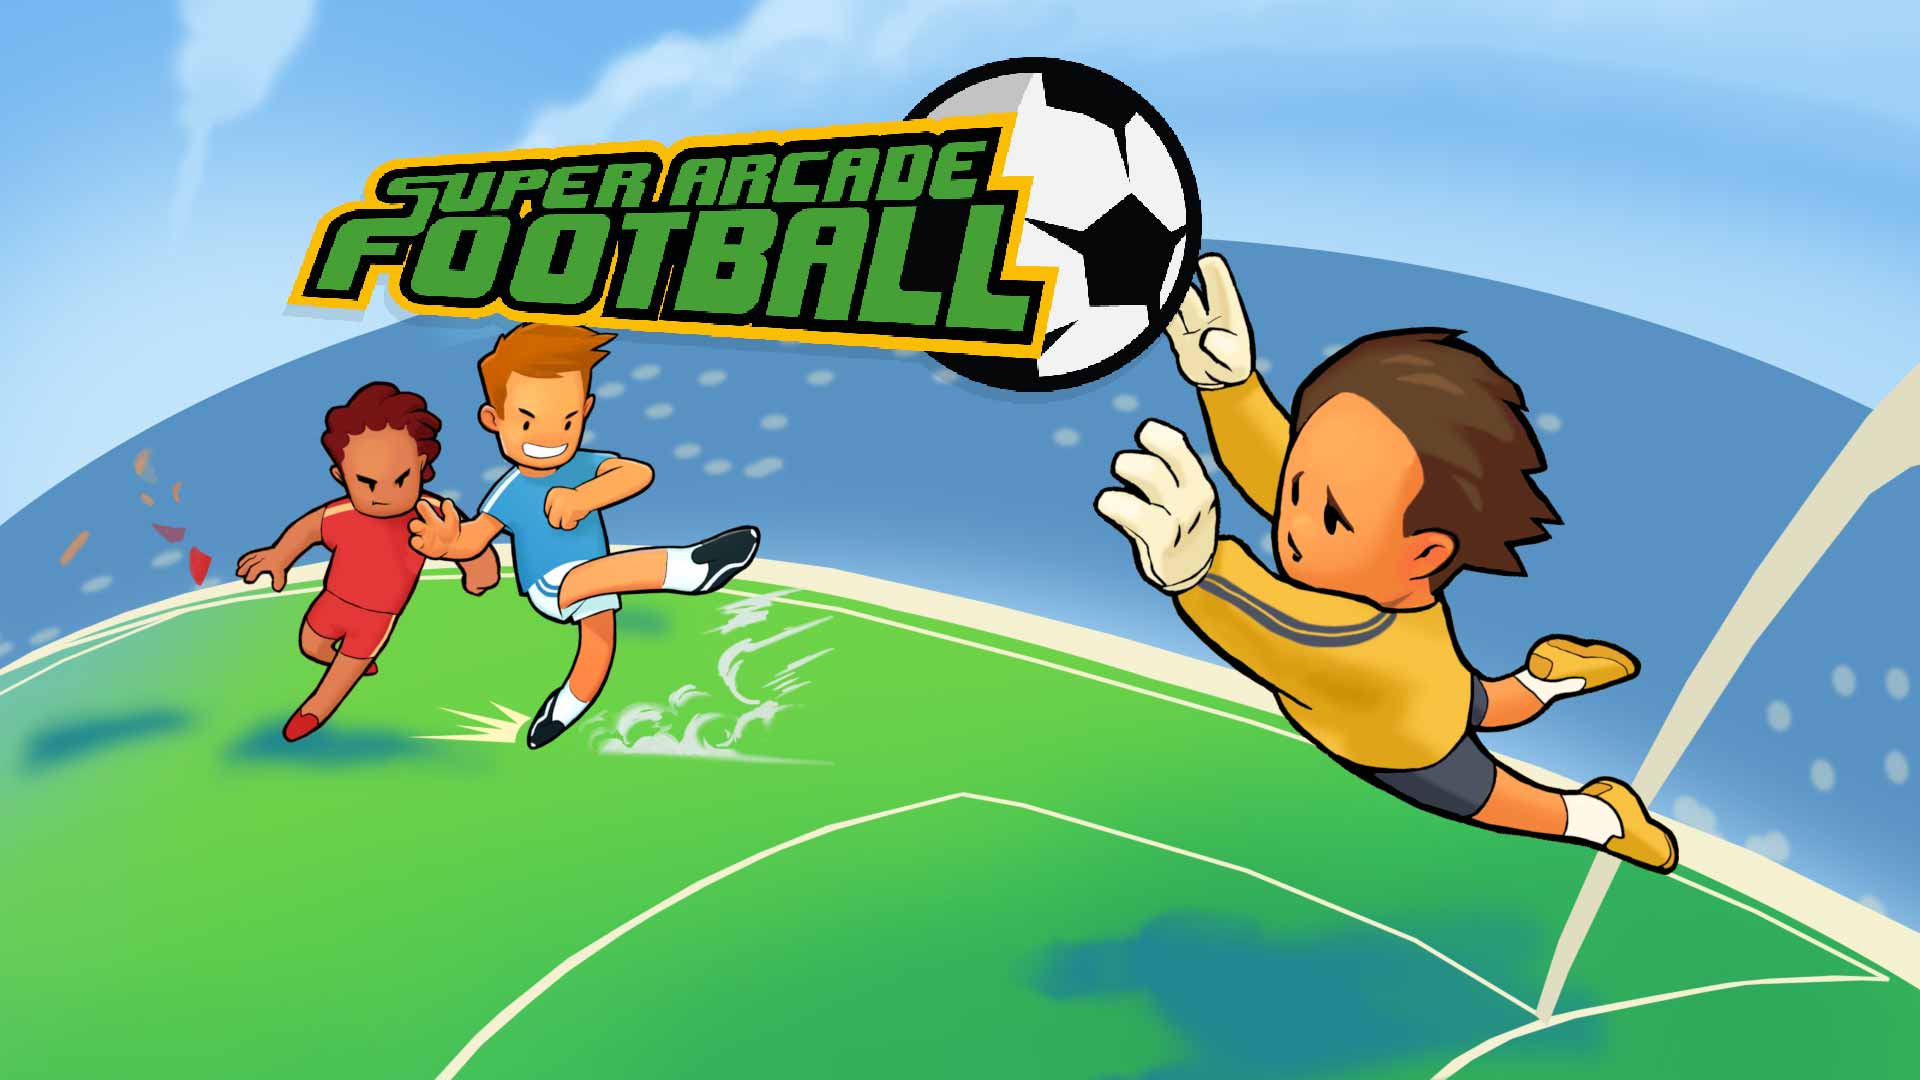 Super Arcade Football Screenshots, Pictures, Wallpapers - Xbox One ...